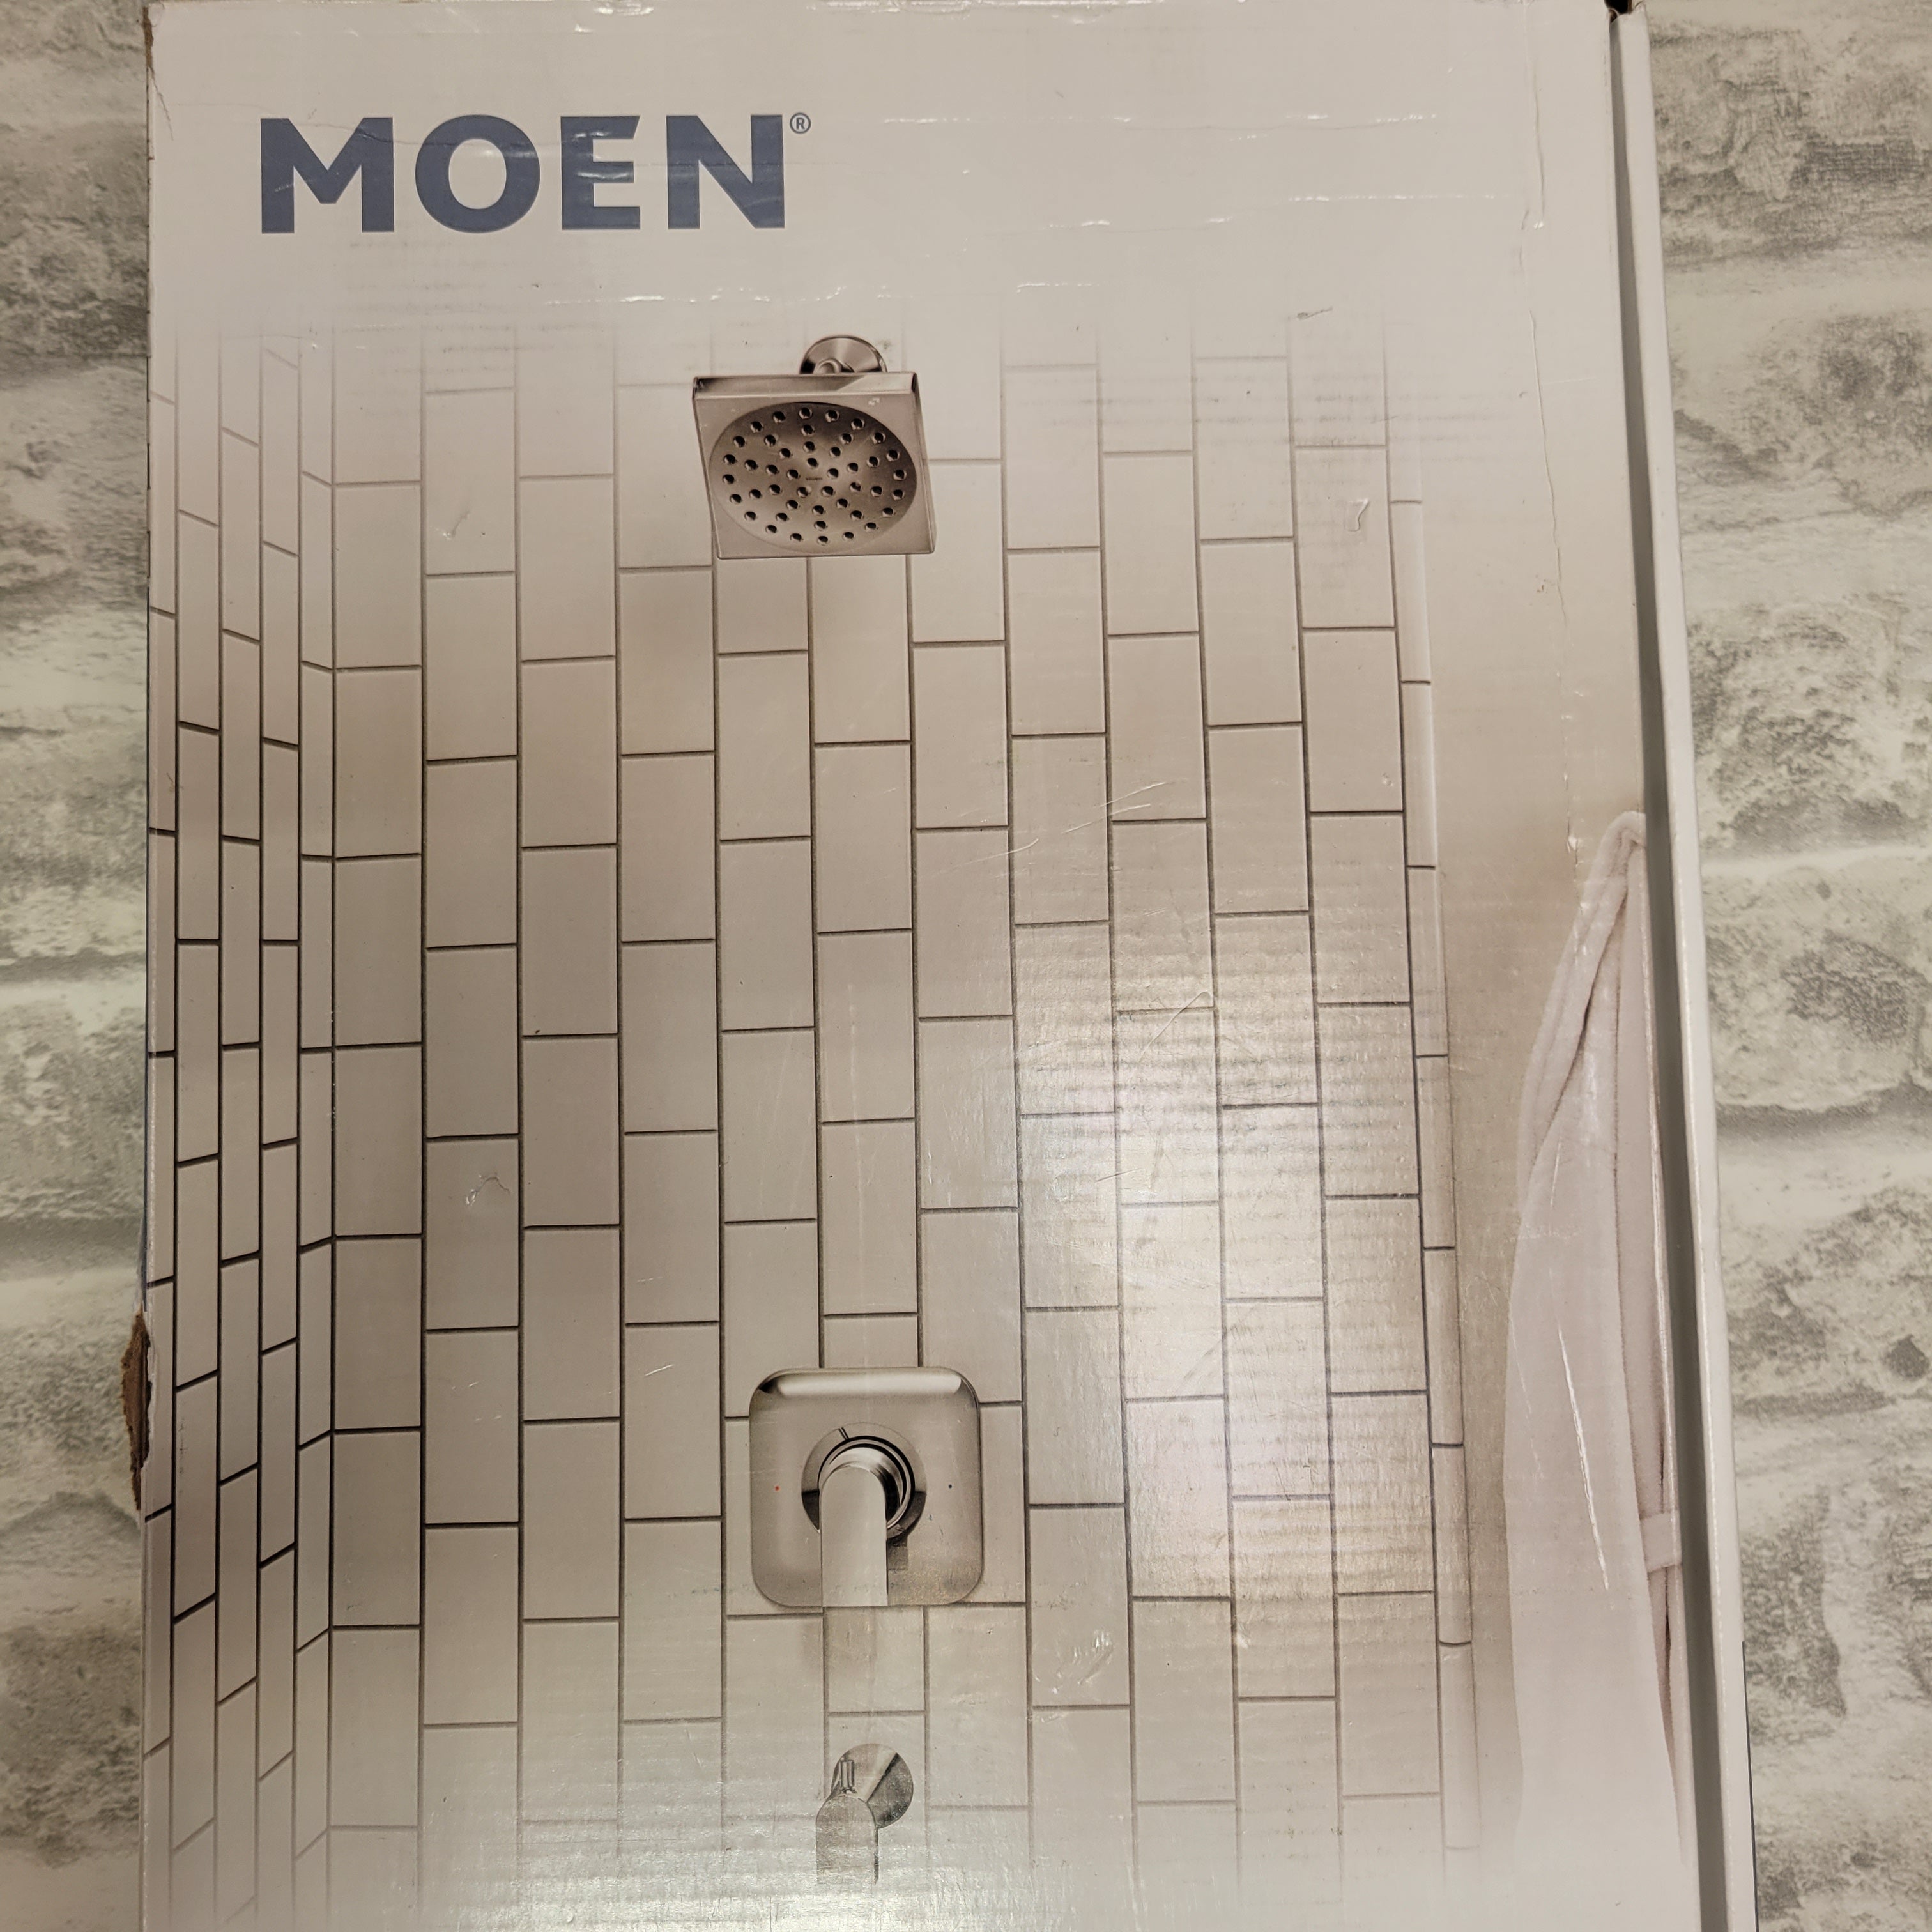 MOEN Genta Single-Handle 1-Spray Tub and Shower Faucet in Chrome (7626910499054)